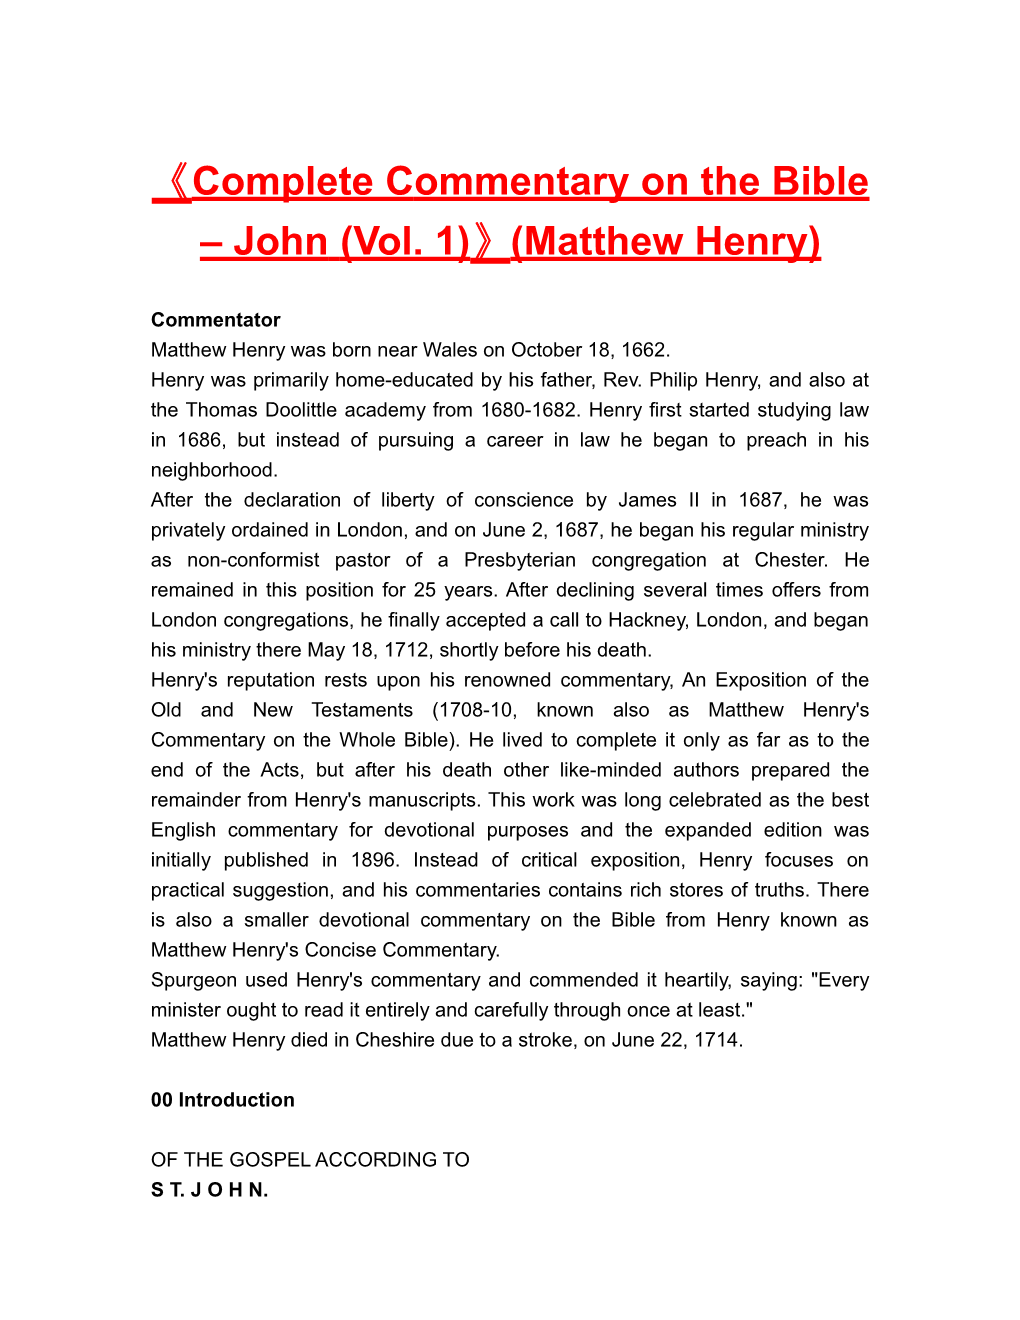 Complete Commentary on the Bible John (Vol. 1) (Matthew Henry)